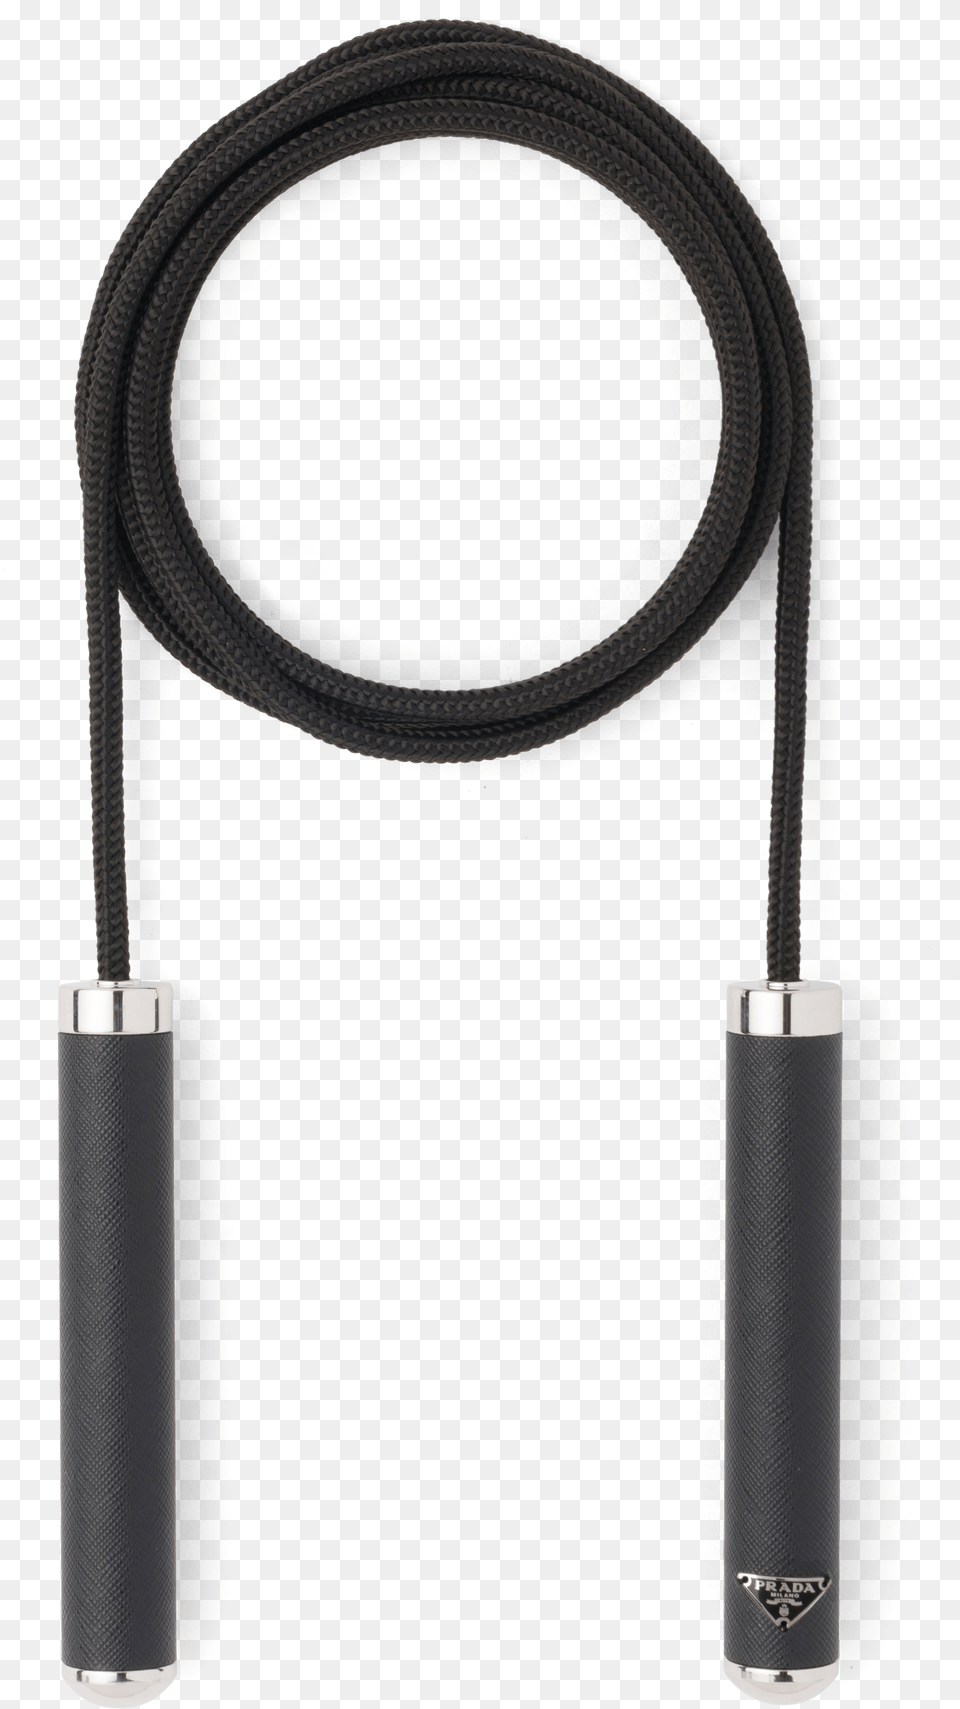 Jump Rope Solid, Electronics, Headphones Png